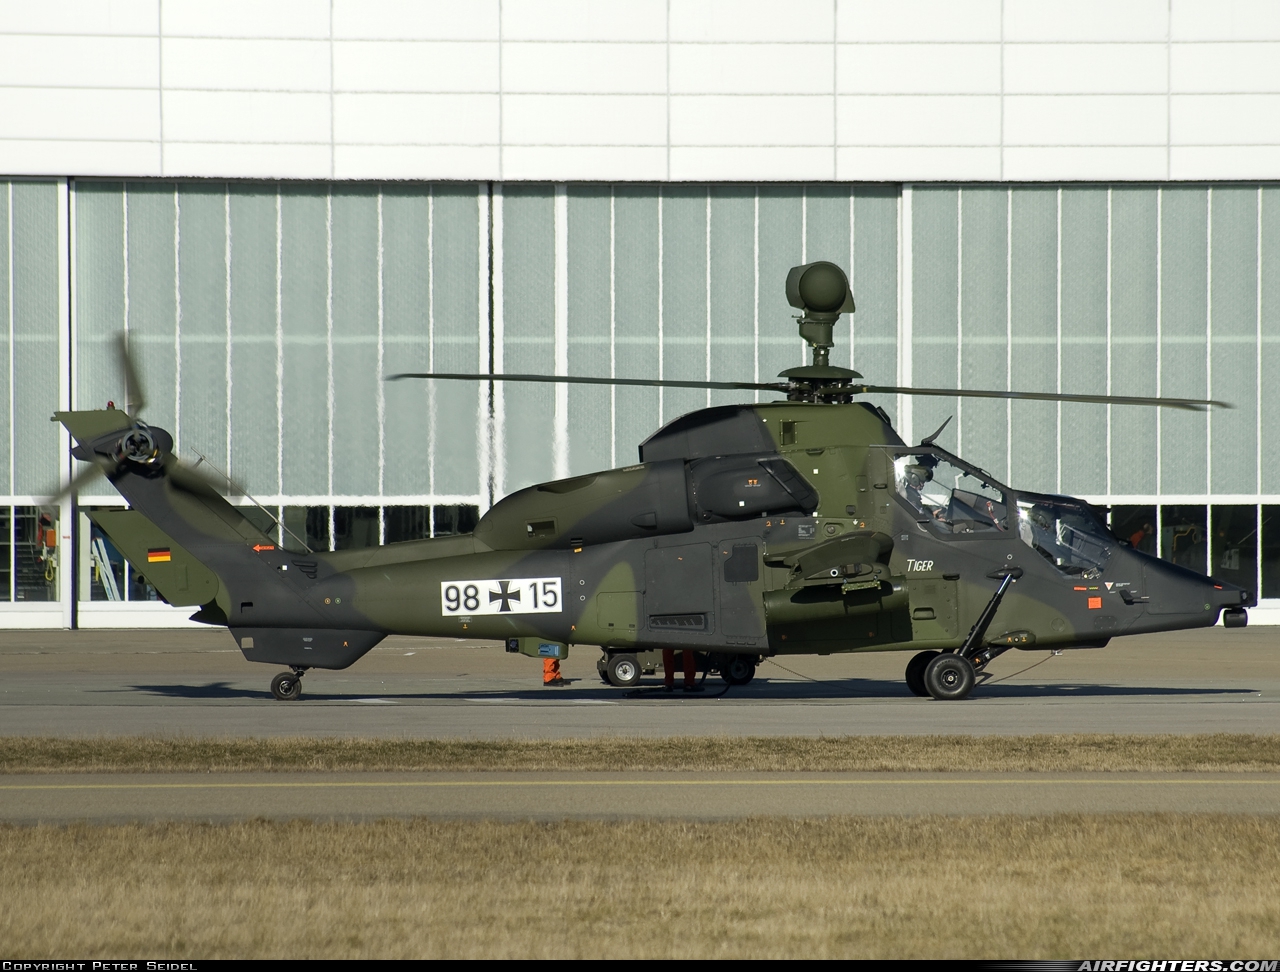 Germany - Army Eurocopter EC-665 Tiger UHT 98+15 at Donauwörth (EDPR), Germany